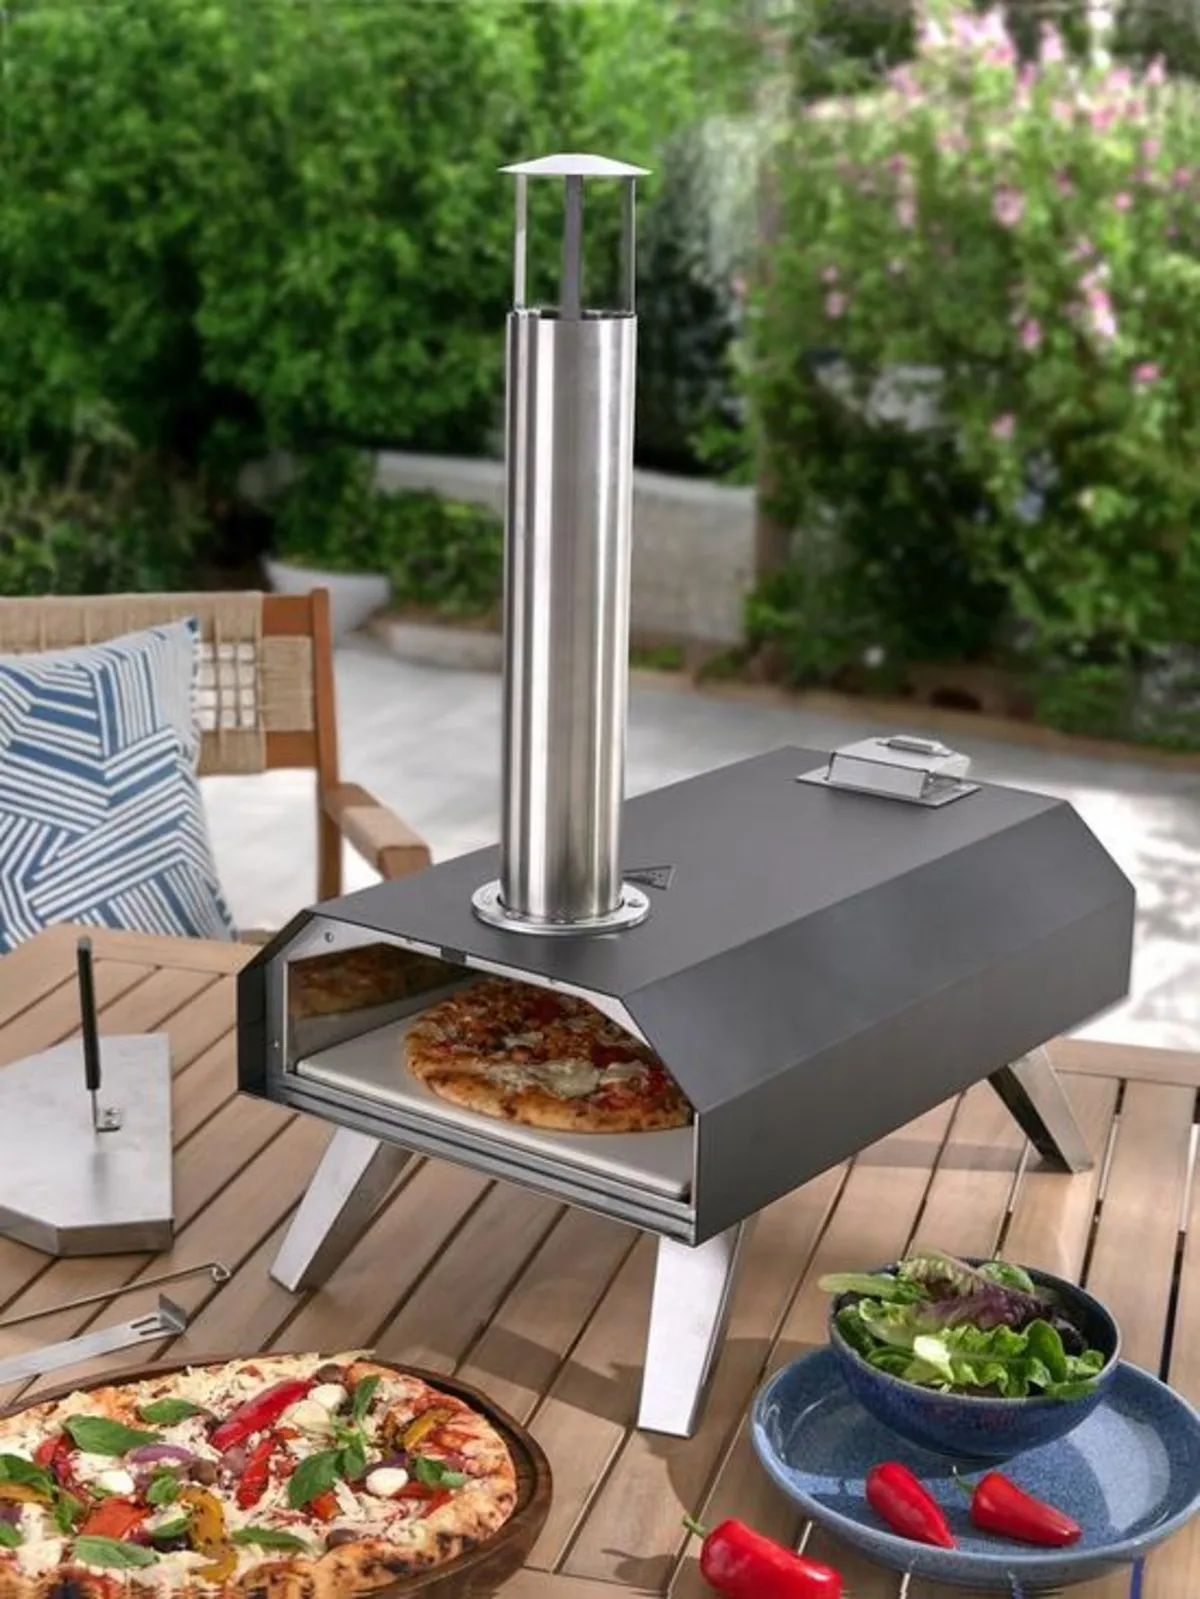 Bullet wood pizza oven